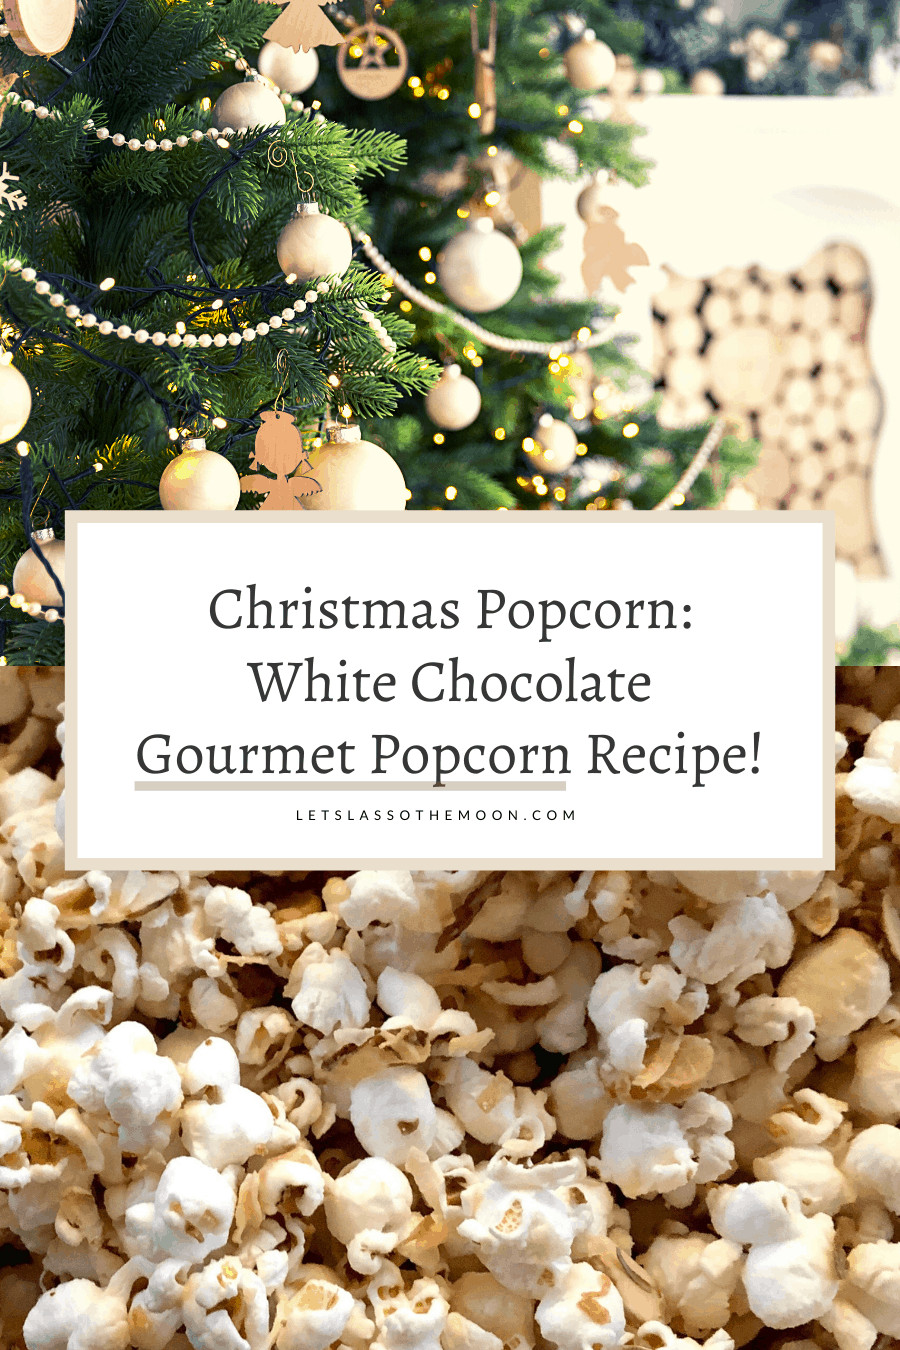 A collage with a Christmas tree and a photo of white chocolate covered popcorn along with the headline "Christmas Popcorn Recipe."